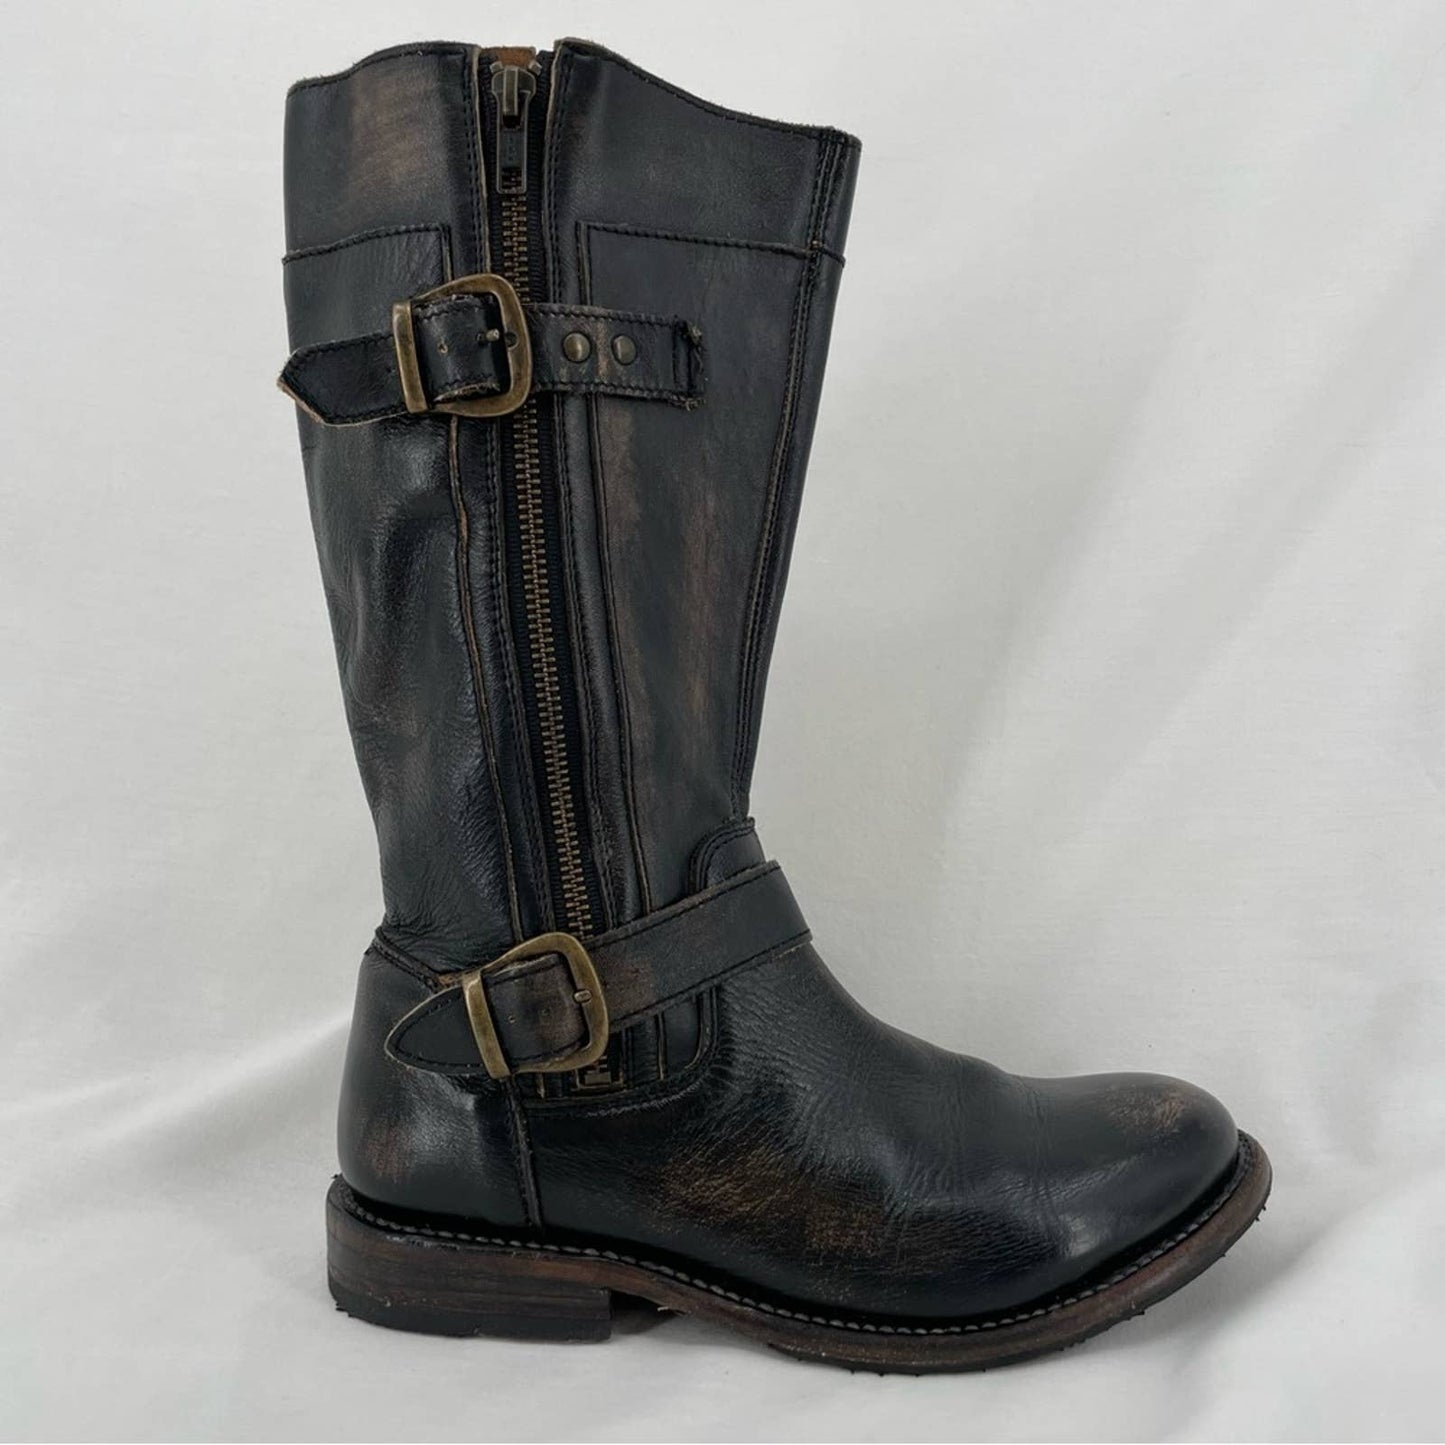 BED|STU Gogo Black Hand Washed Equestrian Engineer Double Zips Pirate Boots Size 7